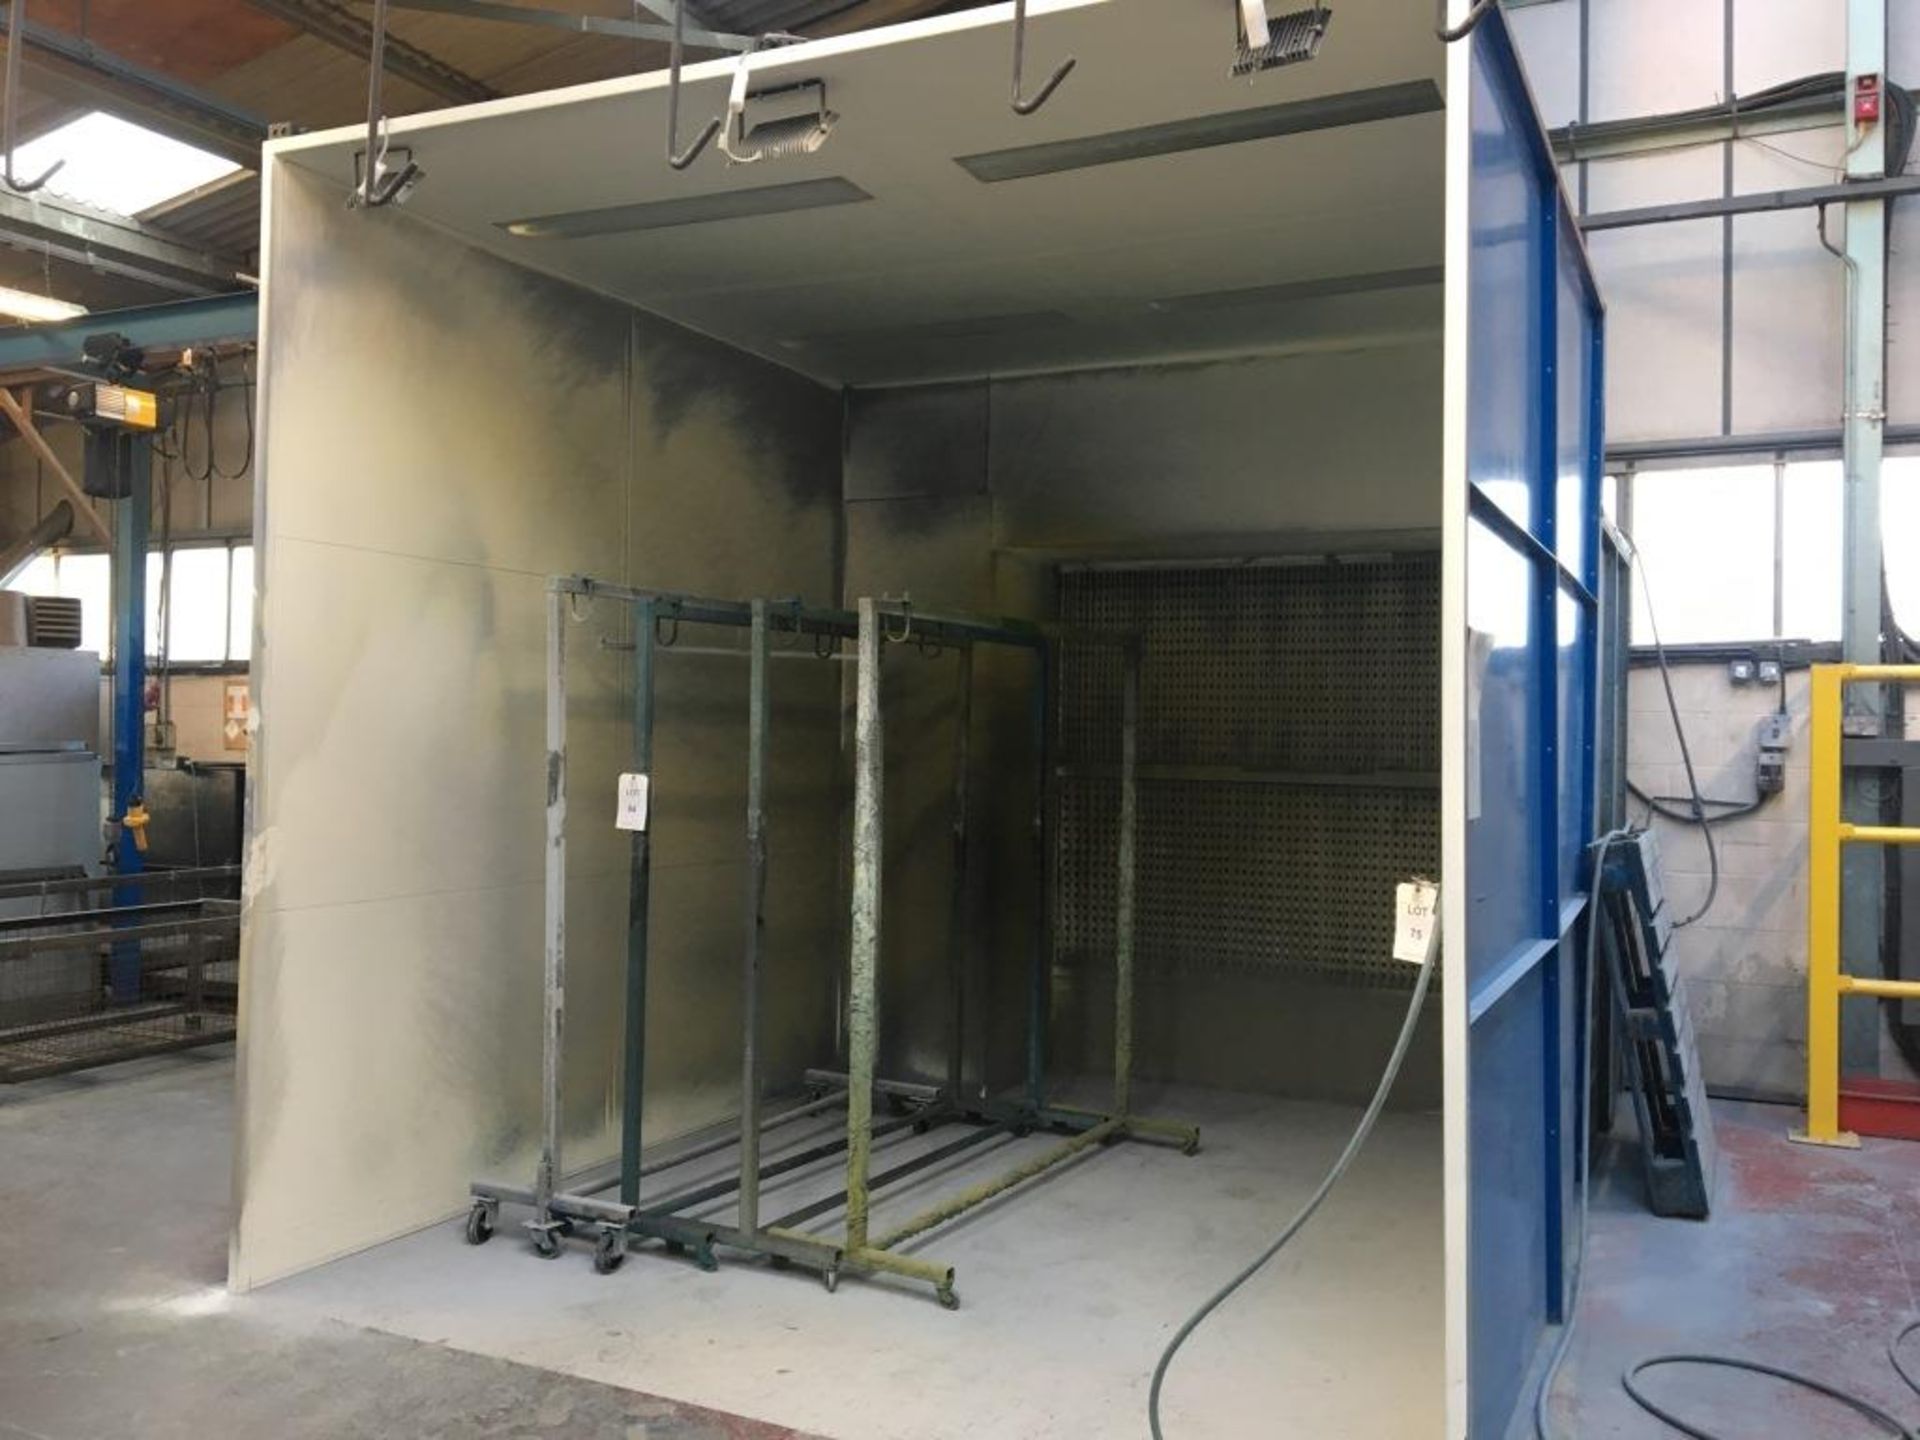 Fabricated spray booth, approx. external dimensions 3.2m wide x 4.8m deep x 3.1m tall. Chimney not